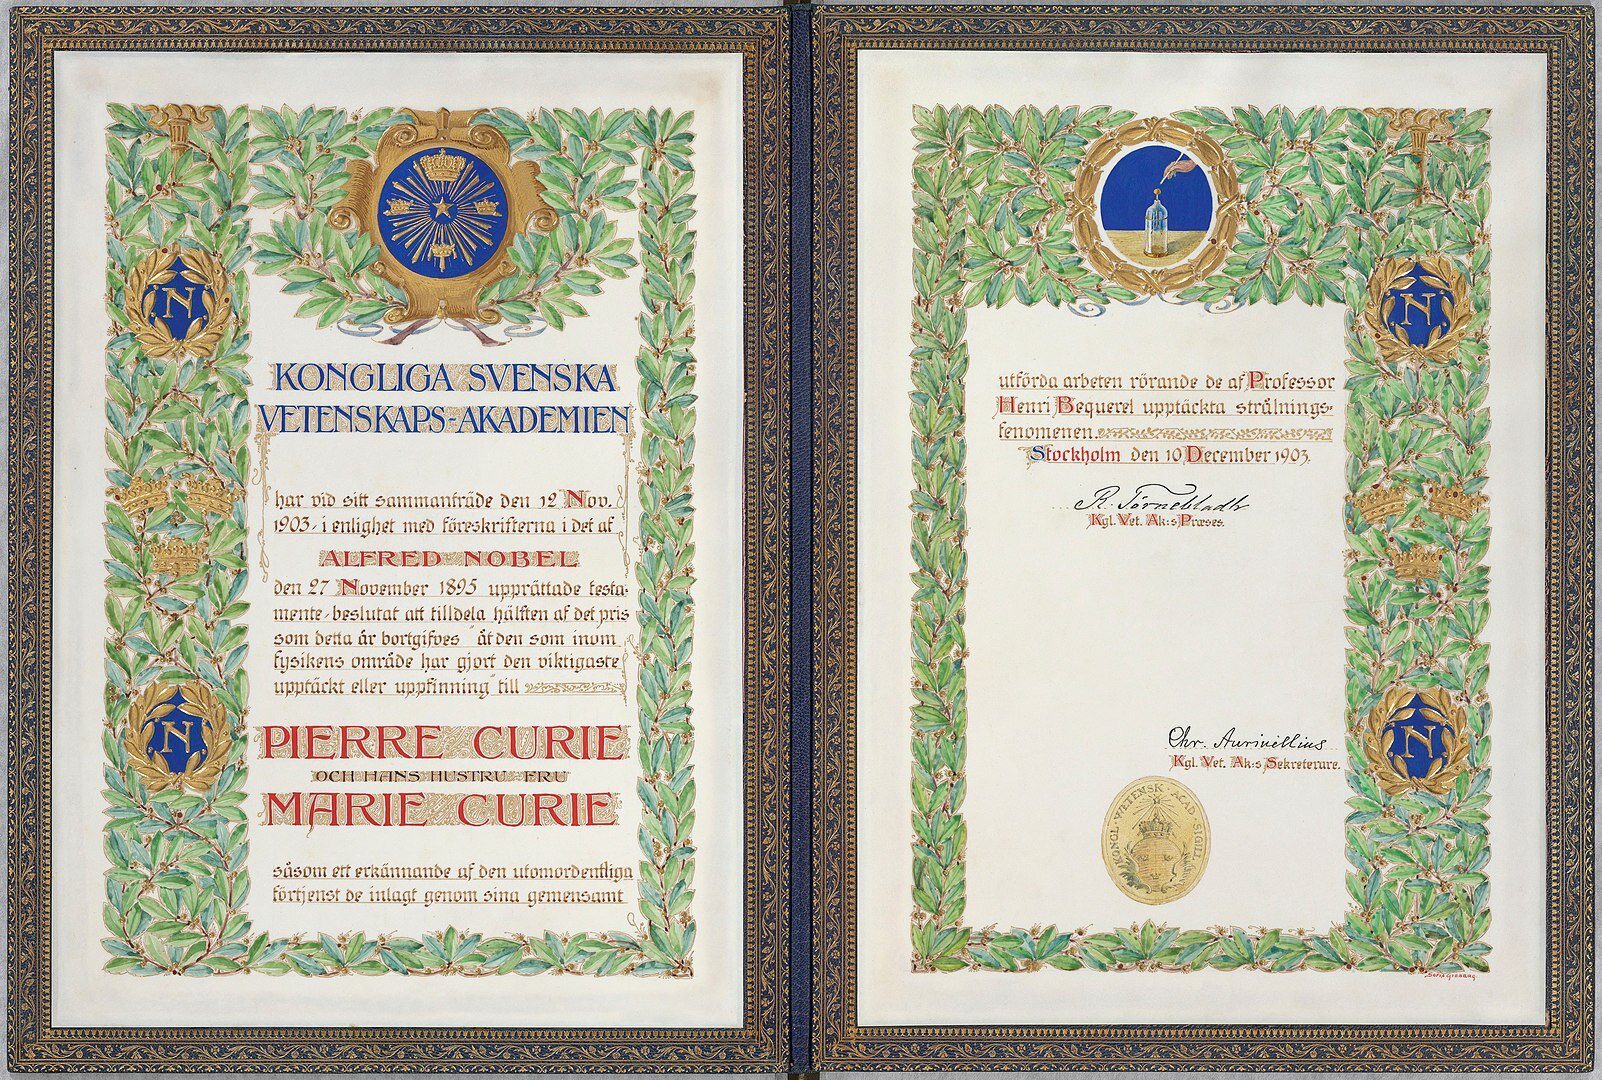 A picture of the 1903 Nobel prize for Physics for Marie Curie and her husband